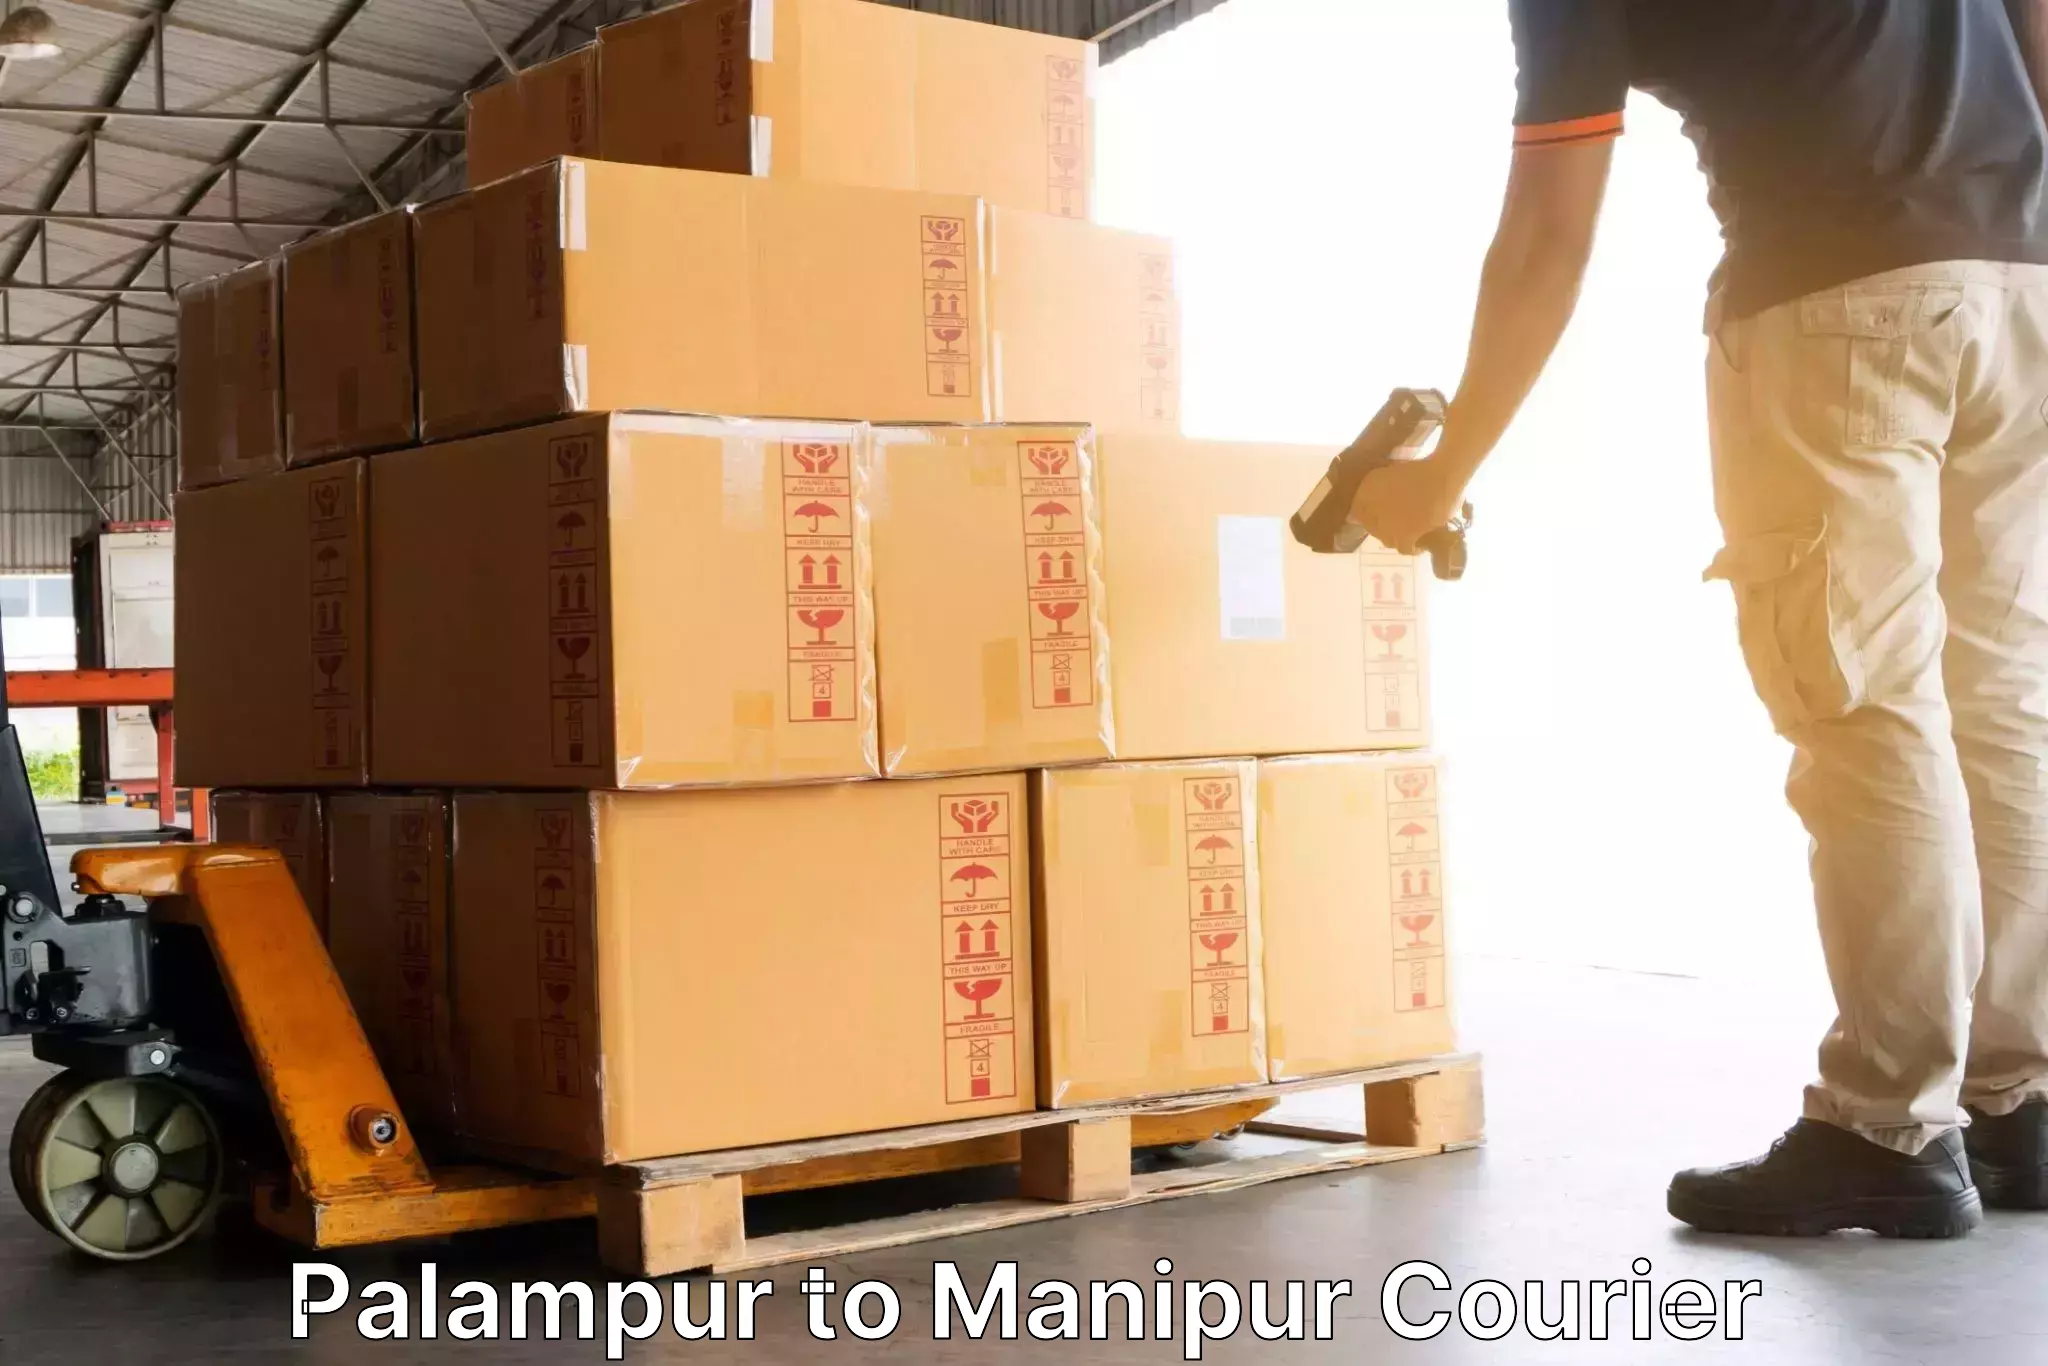 Express delivery capabilities Palampur to Imphal